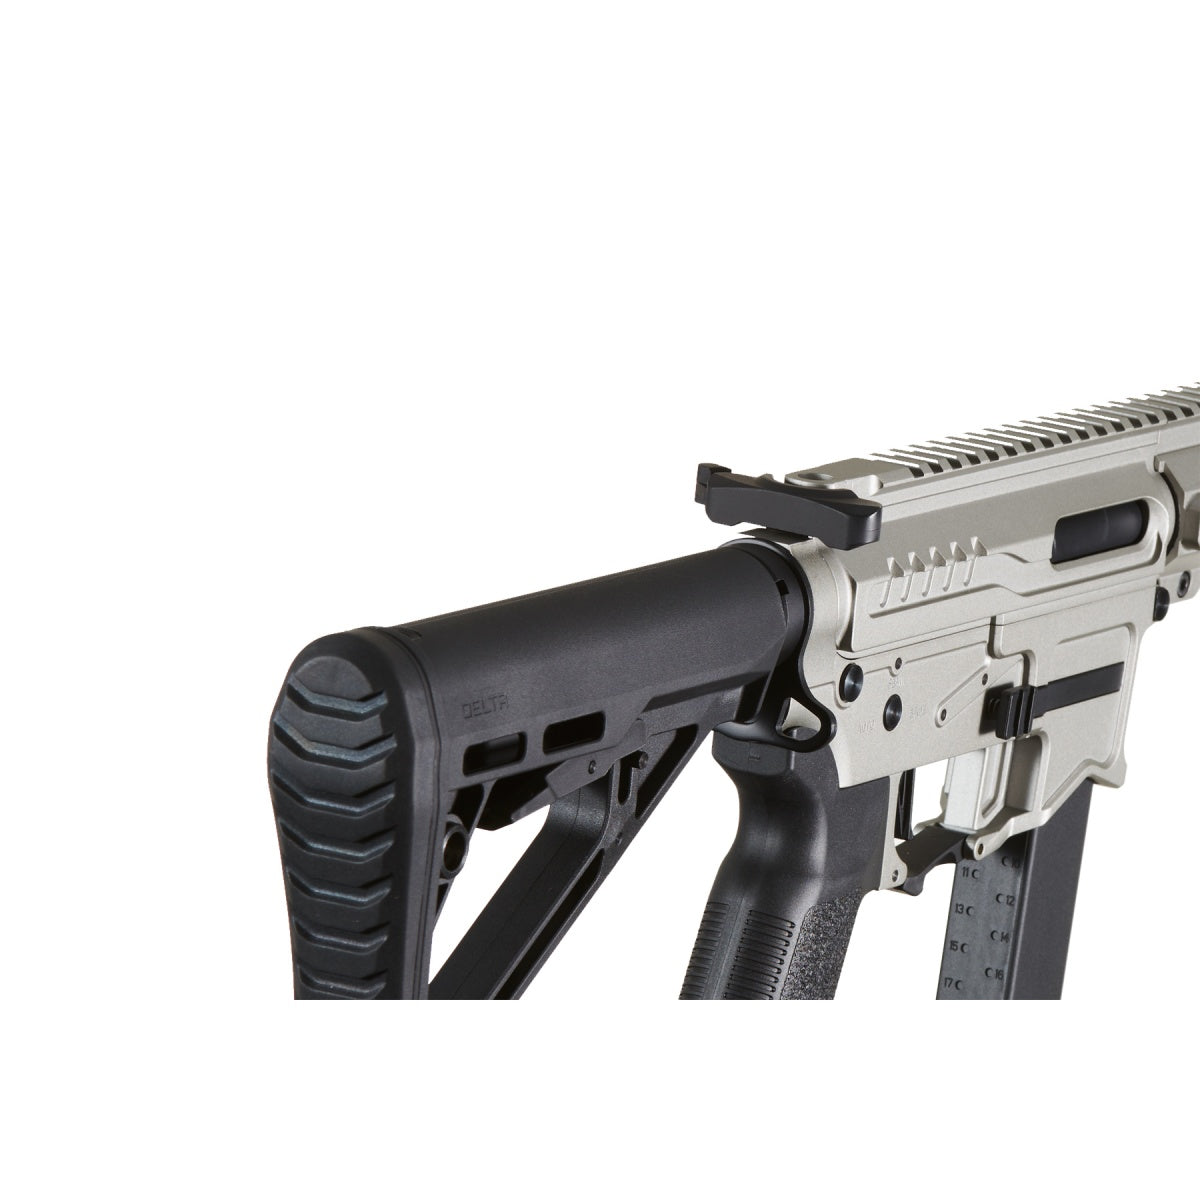 Zion Arms R&D Precision Licensed PW9 Mod 1 Long Rail Airsoft Rifle with Delta Stock - ssairsoft